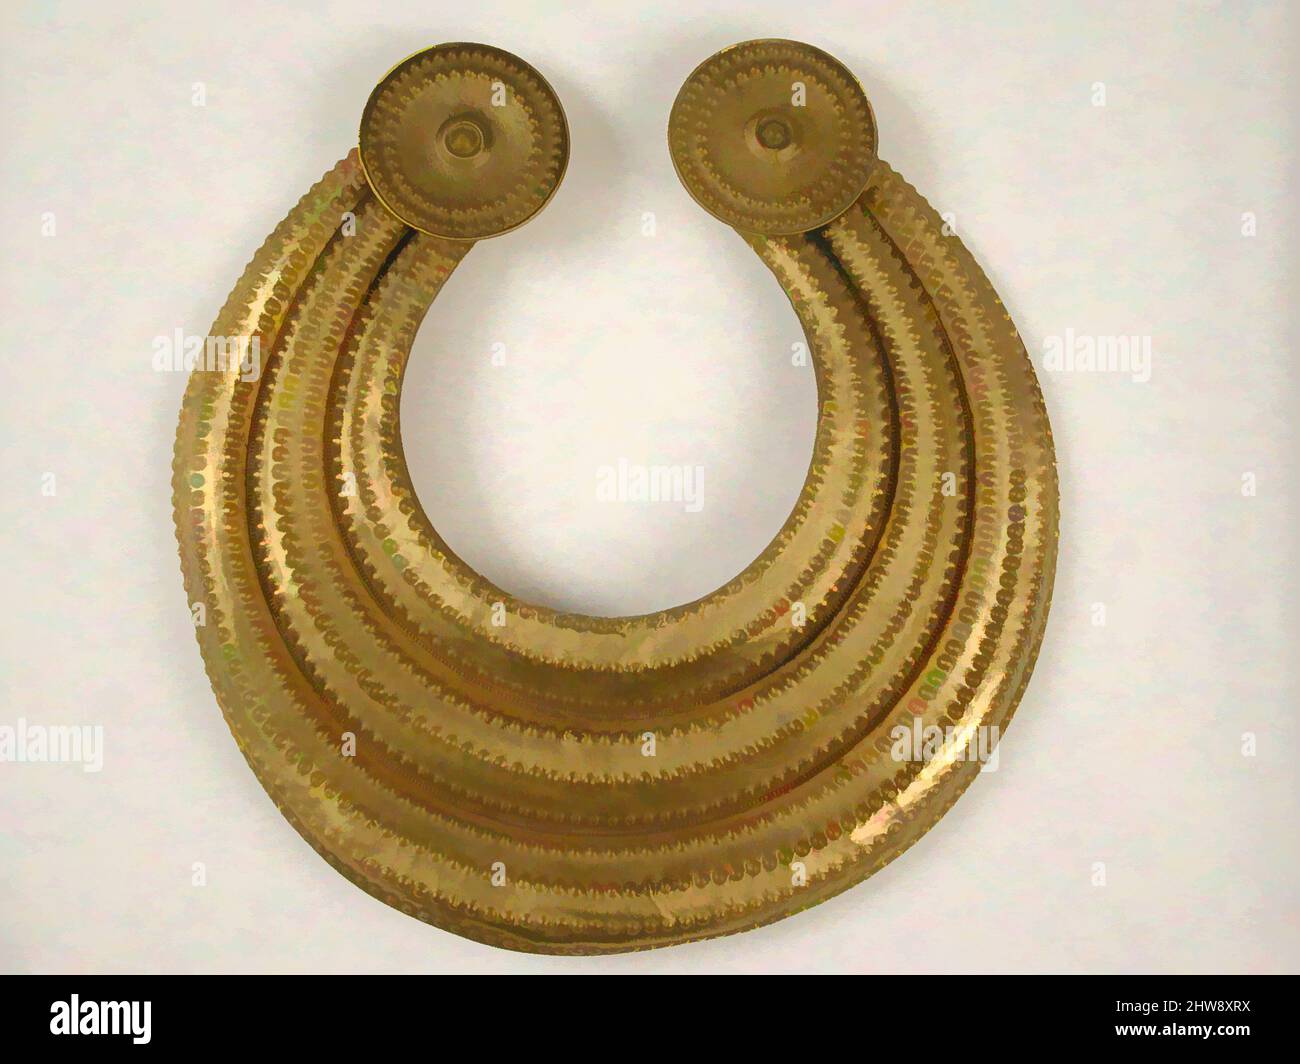 Art inspired by Crescent or Gorget, early 20th century (8th–11th century), Irish, Gold, Diam: 4 15/16 (11 cm.) Depth: 3/16 in. (1/2 cm.), Reproductions-Metalwork, Classic works modernized by Artotop with a splash of modernity. Shapes, color and value, eye-catching visual impact on art. Emotions through freedom of artworks in a contemporary way. A timeless message pursuing a wildly creative new direction. Artists turning to the digital medium and creating the Artotop NFT Stock Photo